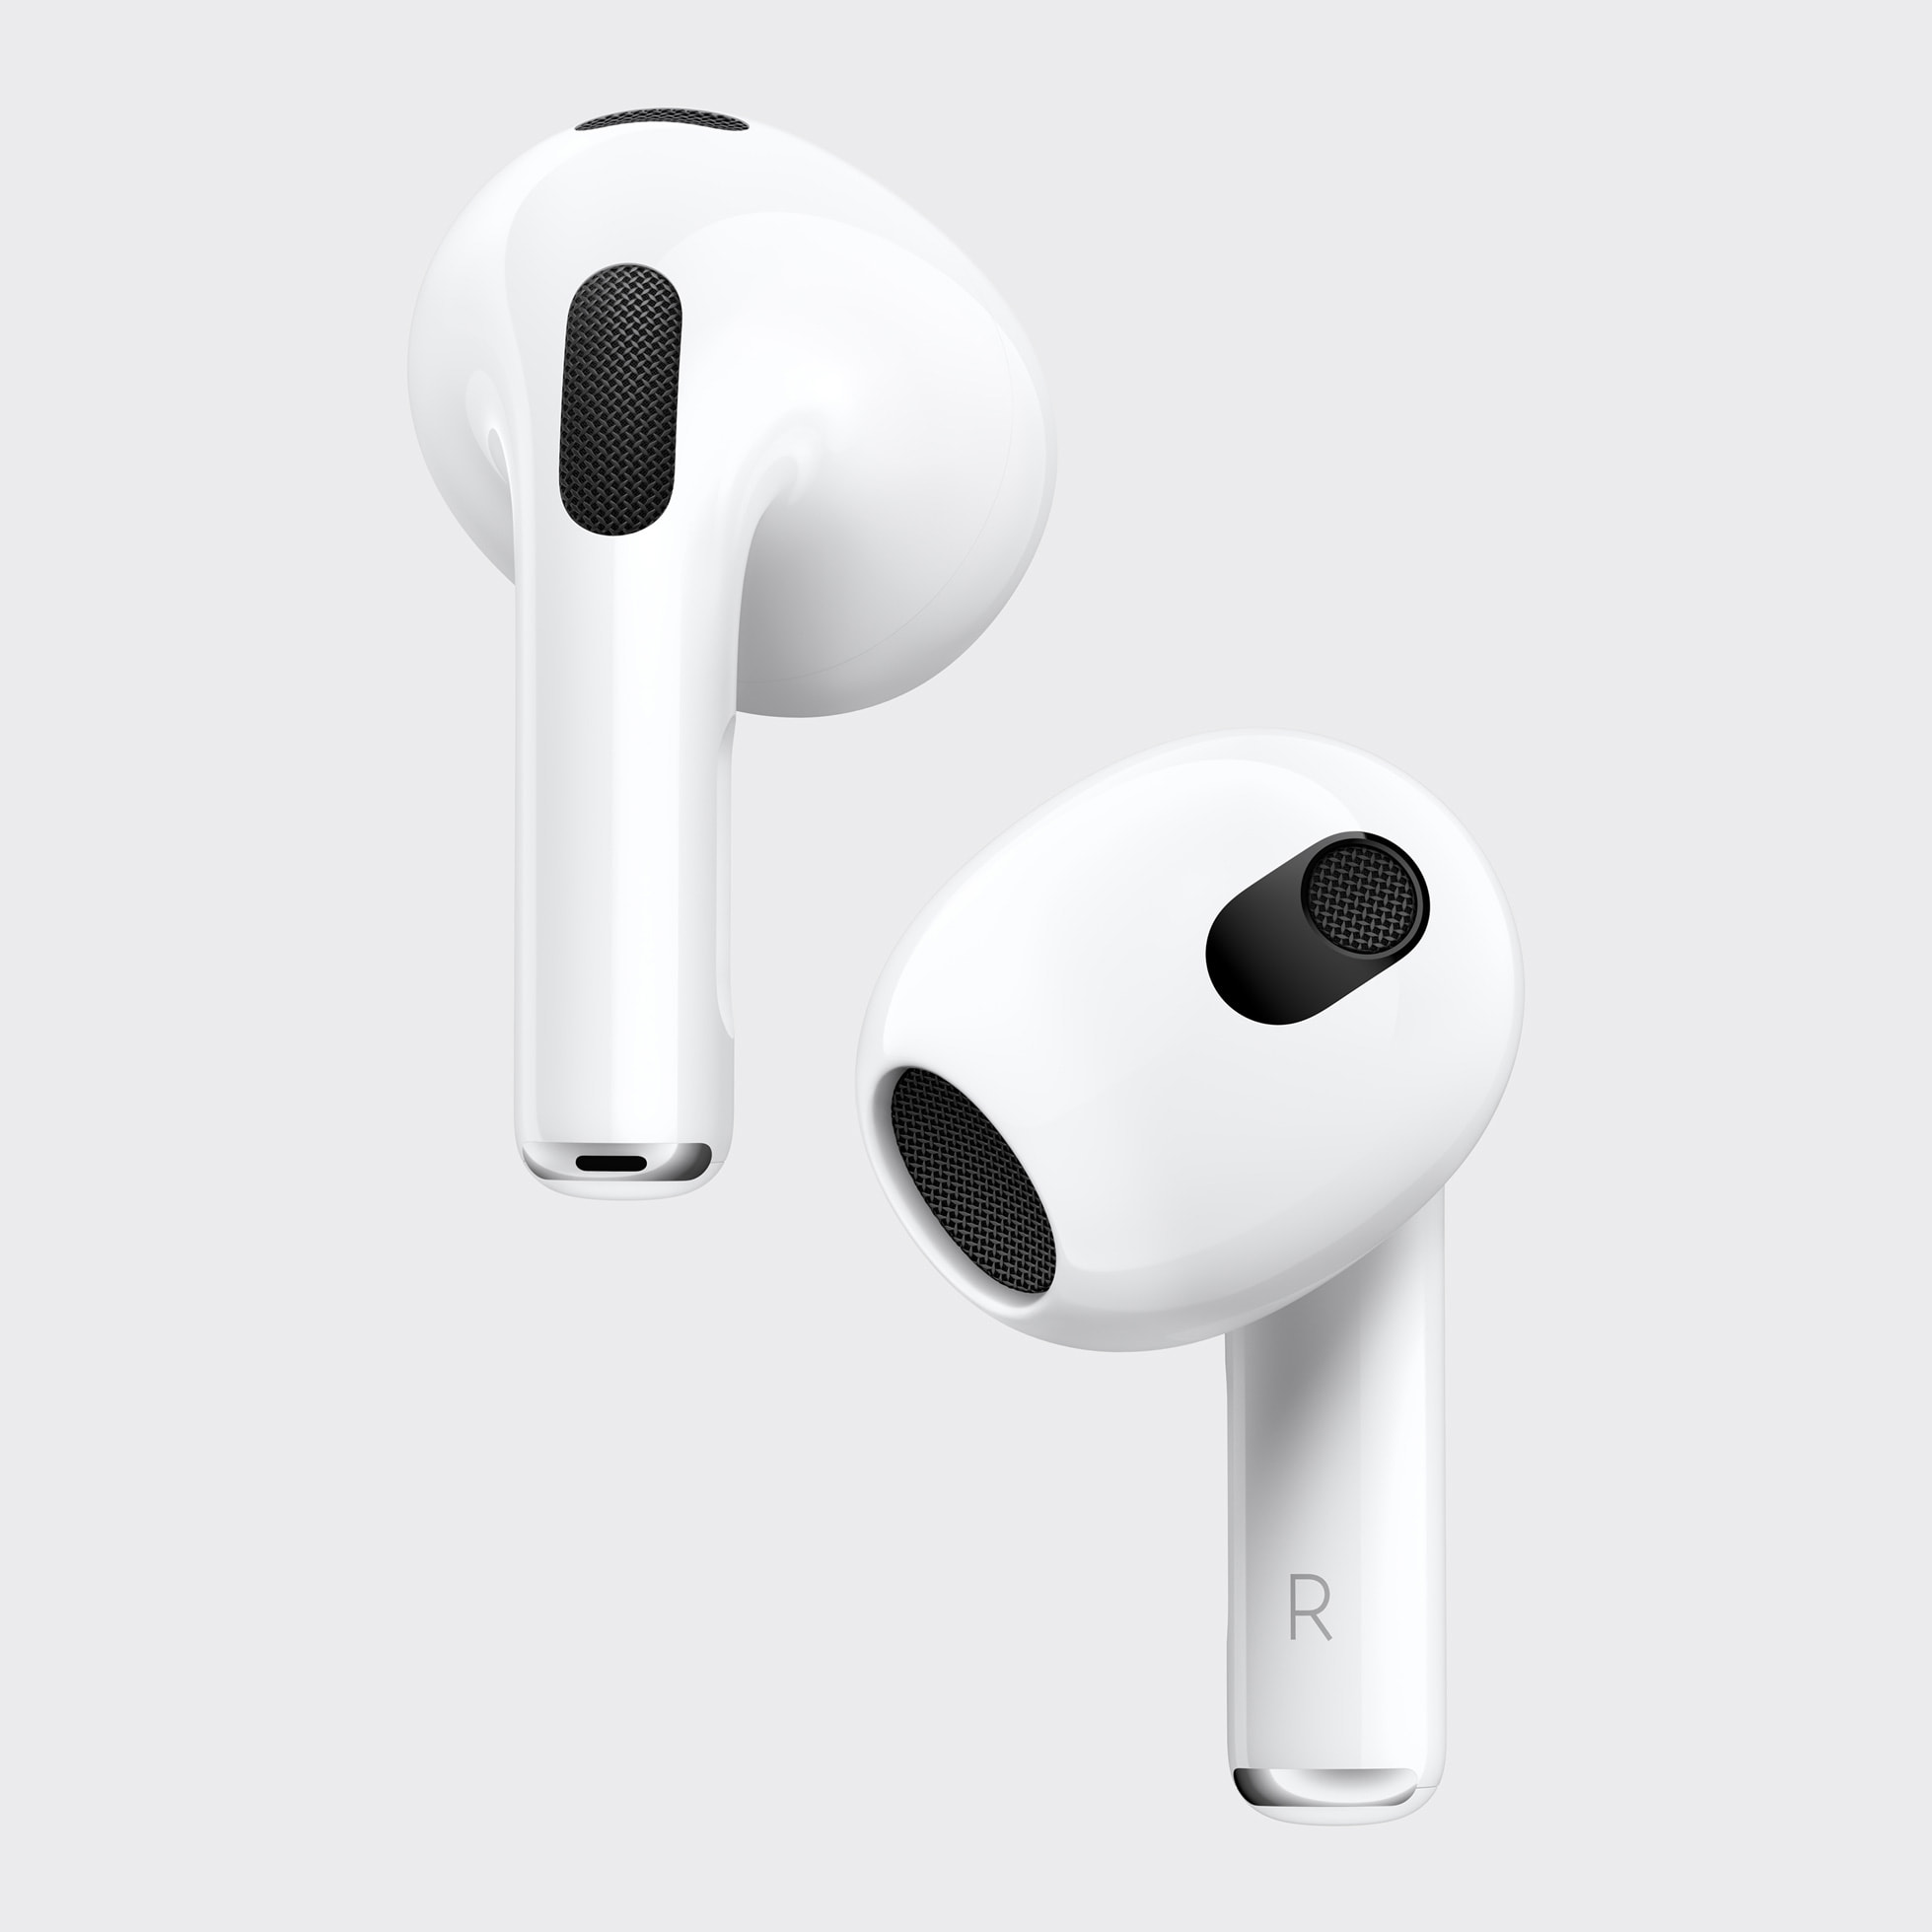 offentliggøre Ugle Cater Introducing the next generation of AirPods - Apple